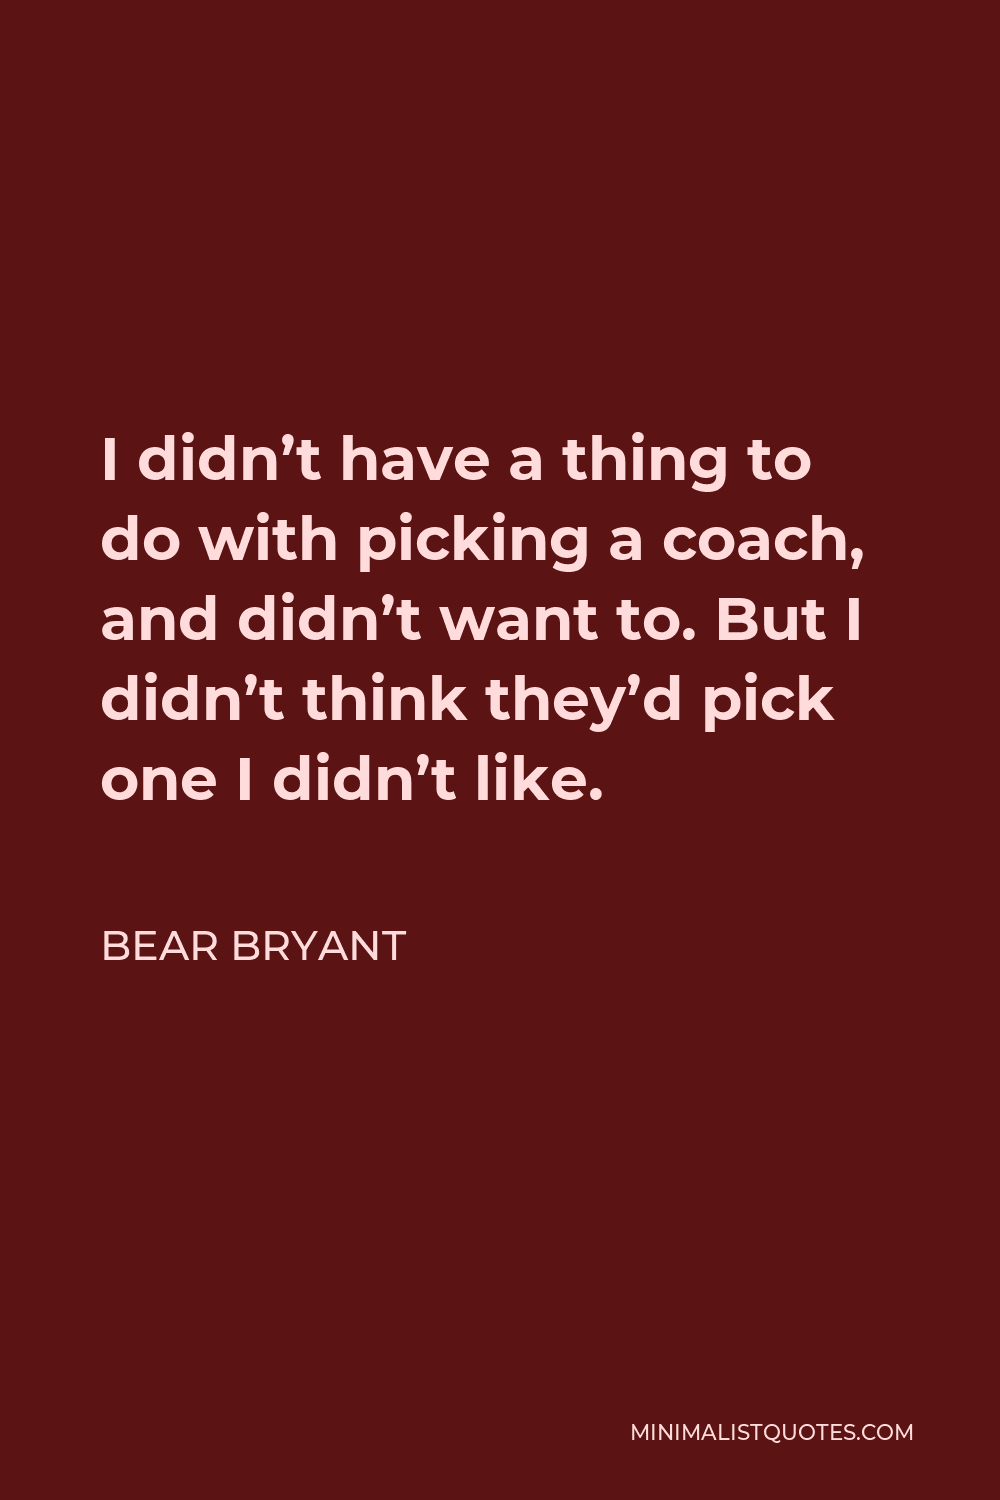 Bear Bryant Quote - I didn’t have a thing to do with picking a coach, and didn’t want to. But I didn’t think they’d pick one I didn’t like.